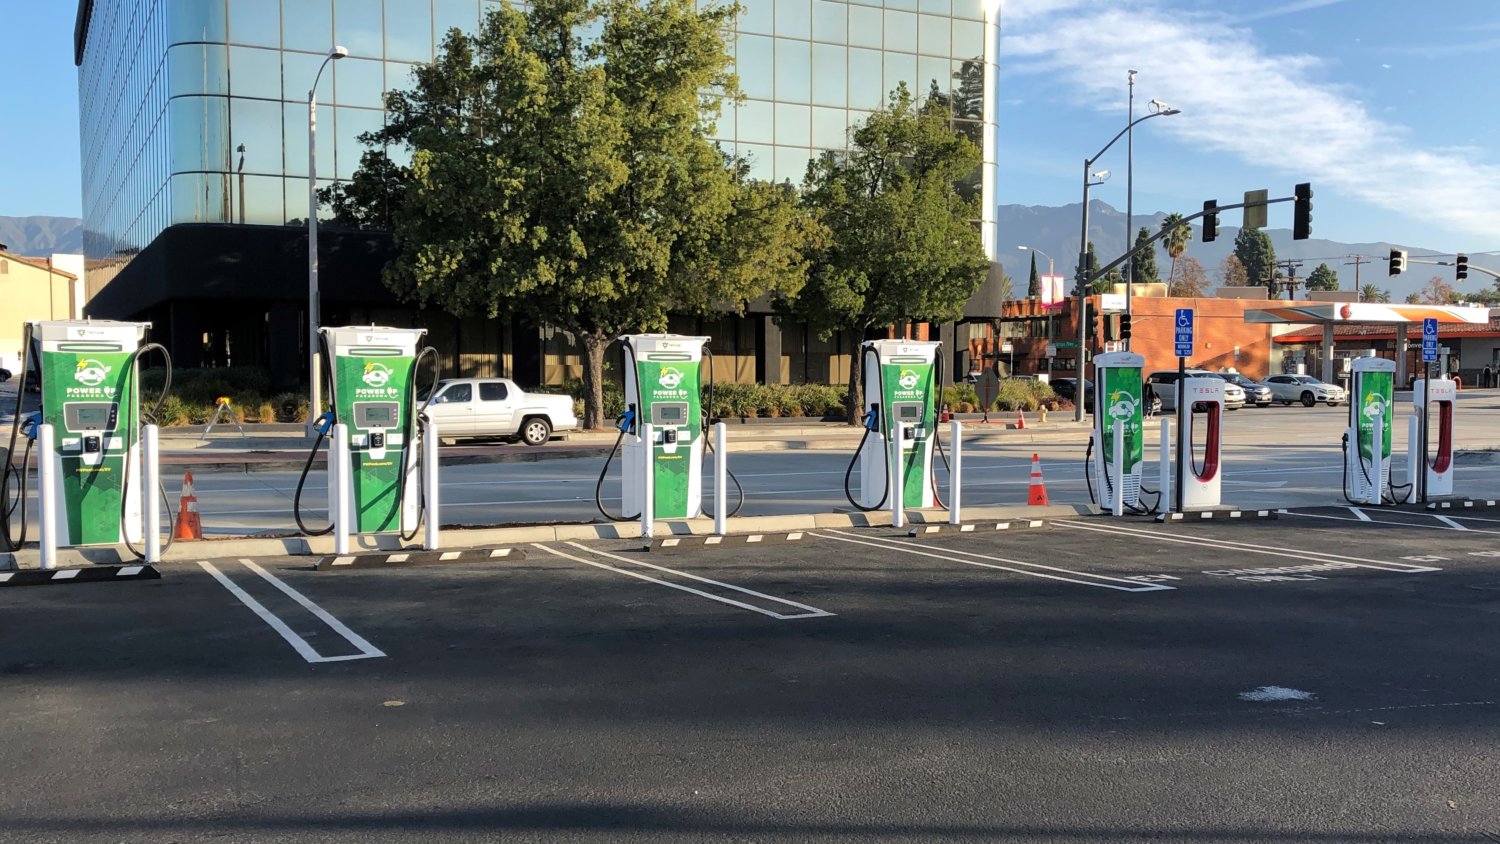 Pasadena s New Fast Charging EV Station Electric Cars Charge Up The 